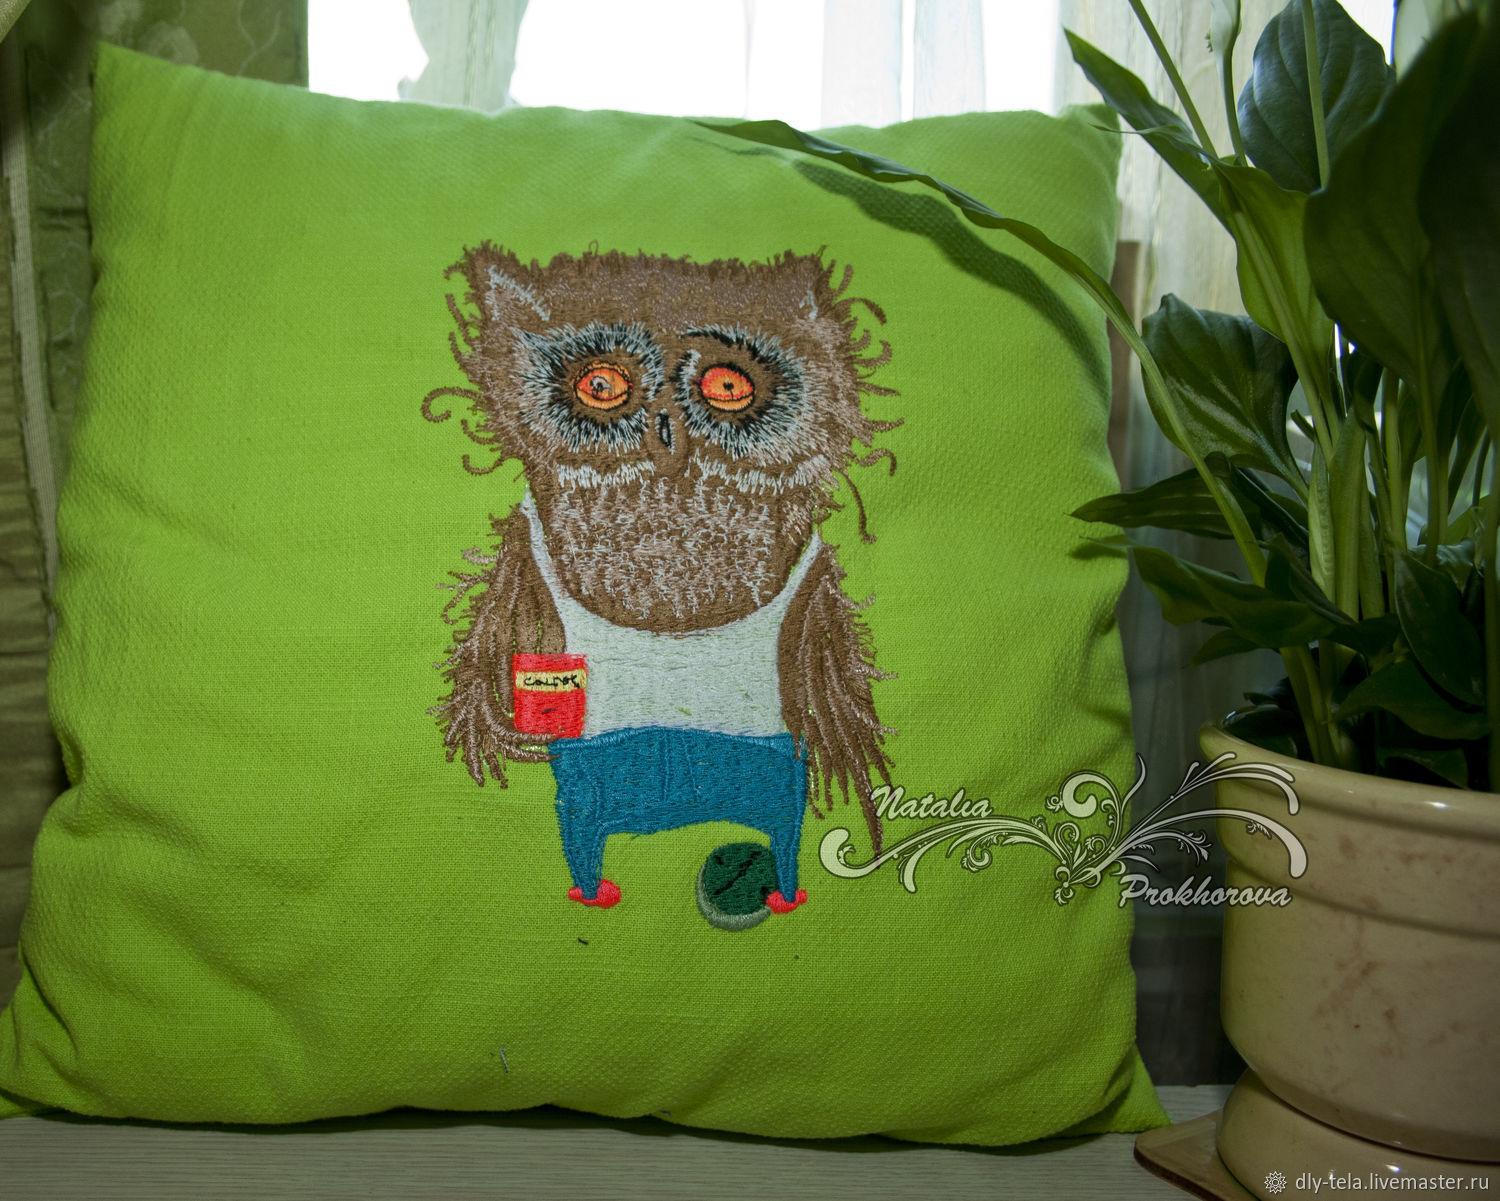 Embroidered cushion with owl at morning design